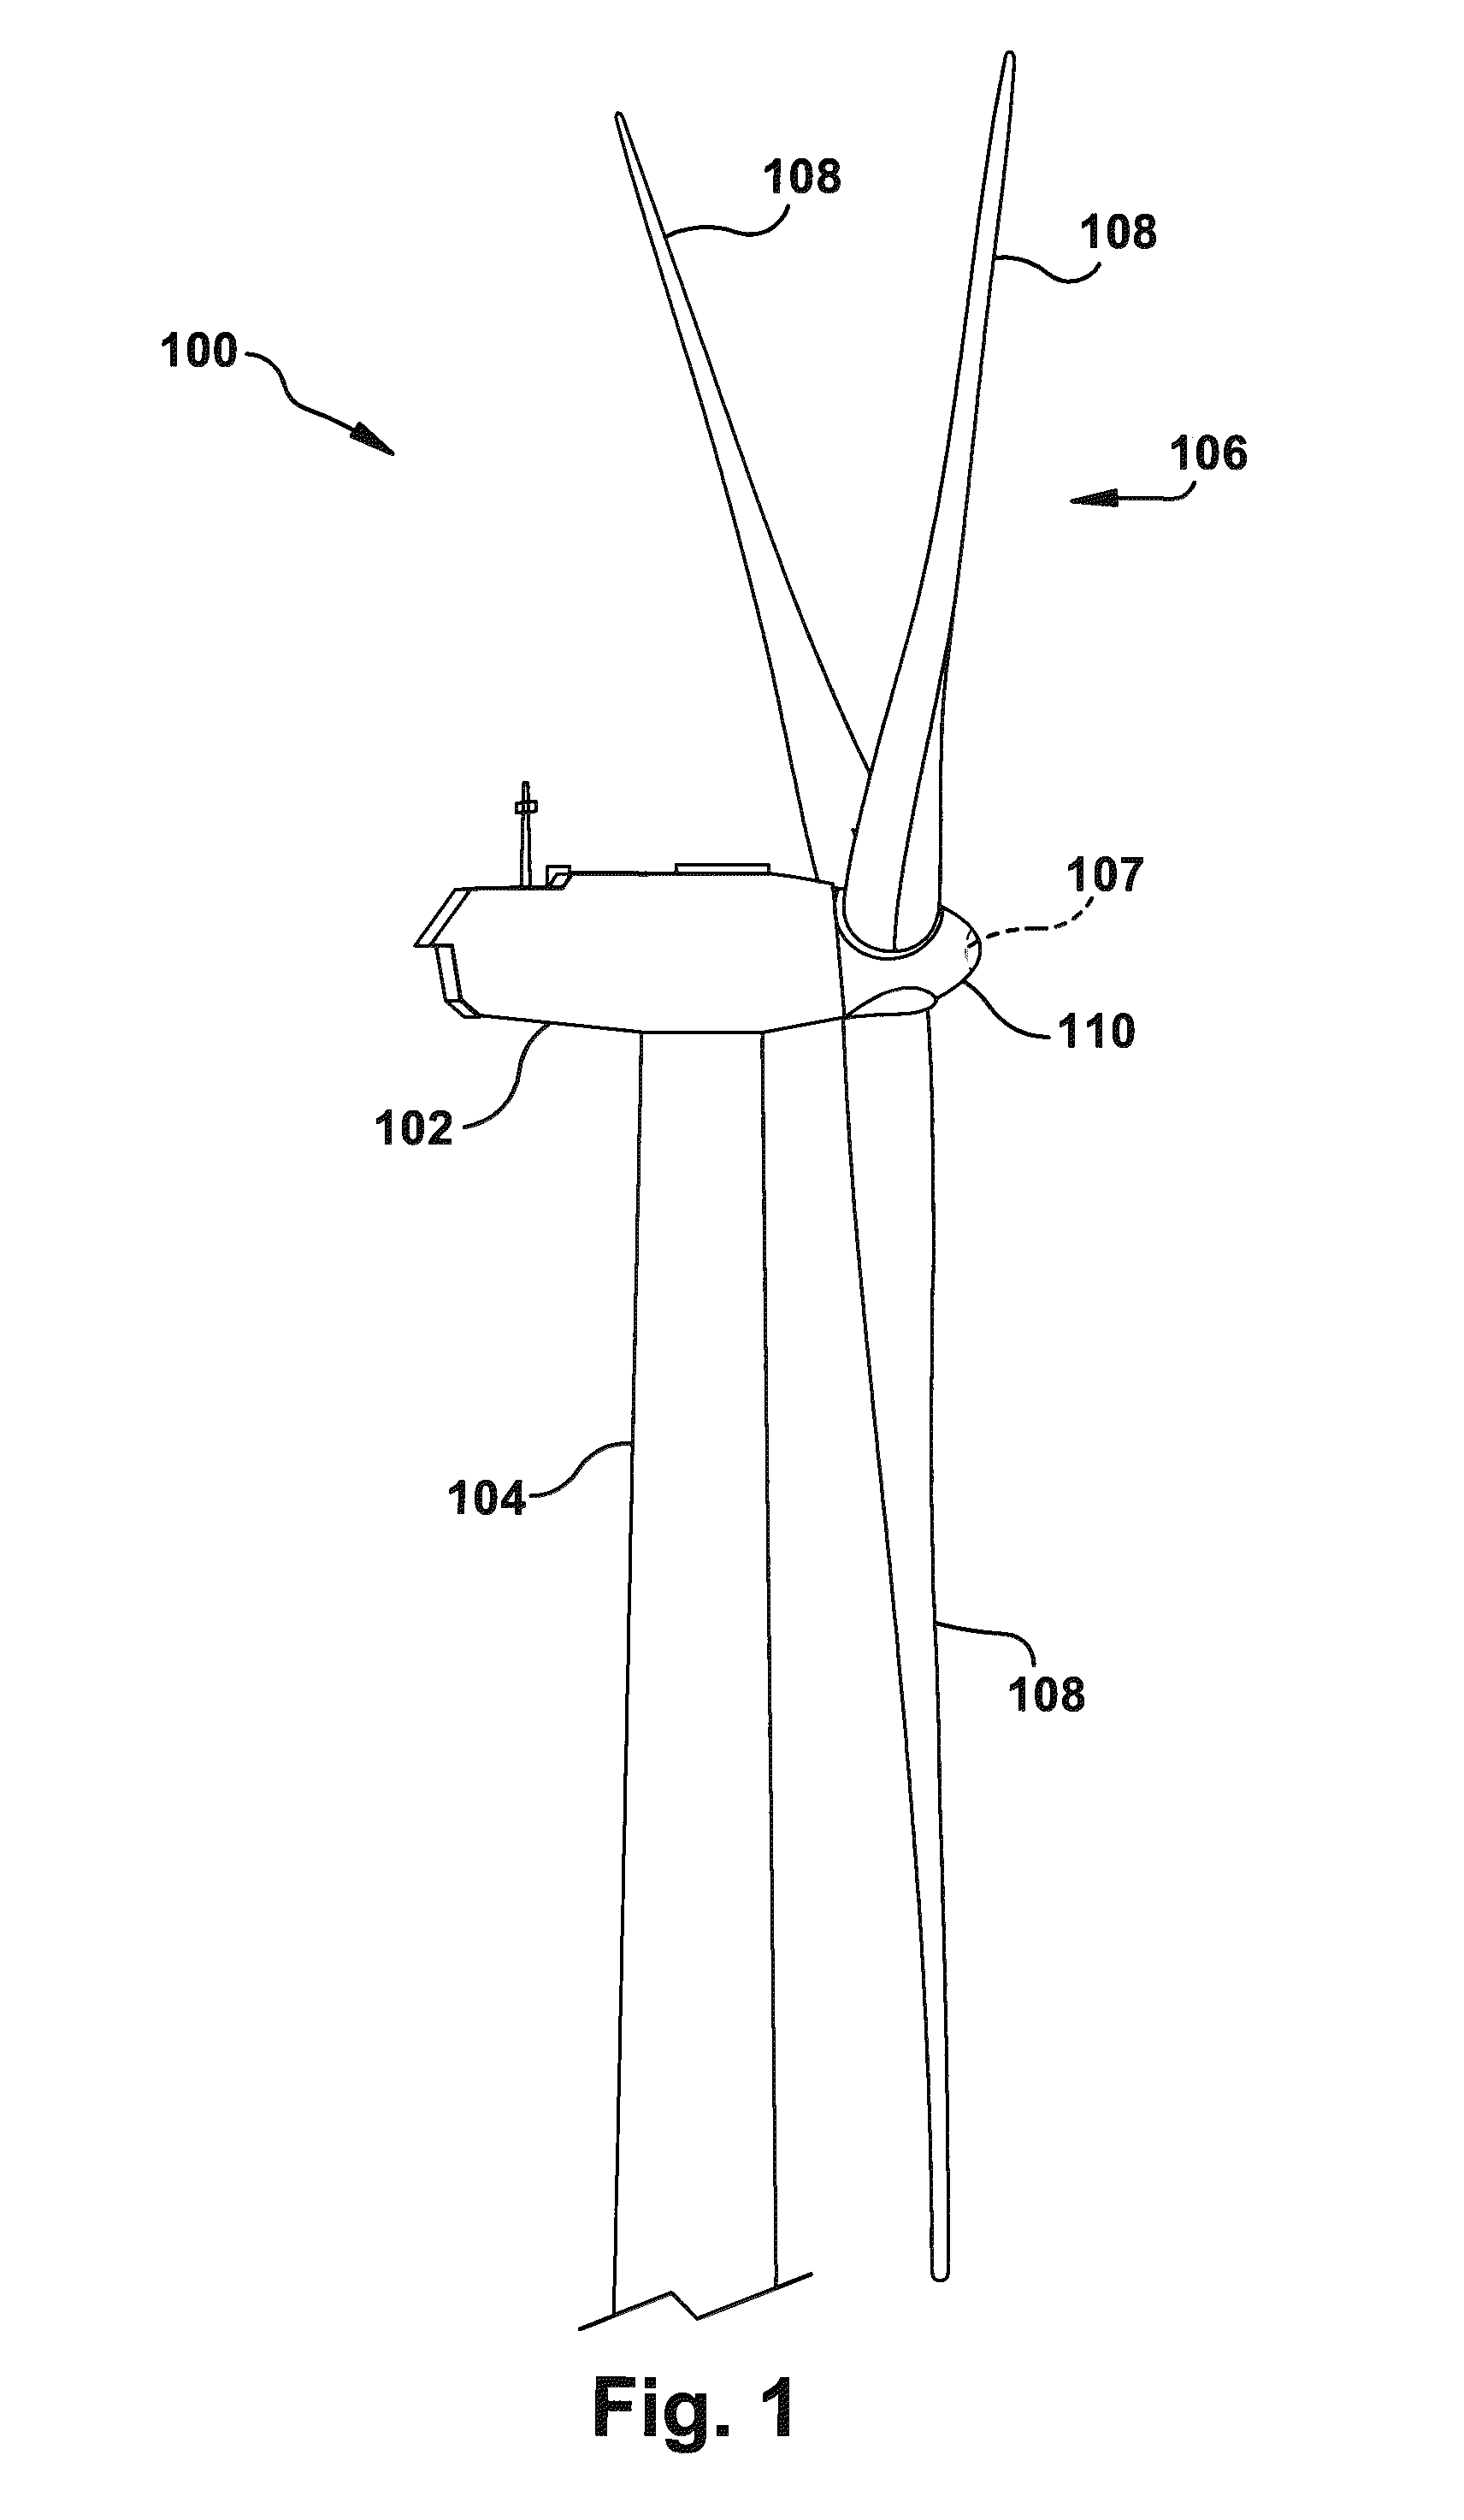 Spinner-less hub access and lifting system for a wind turbine